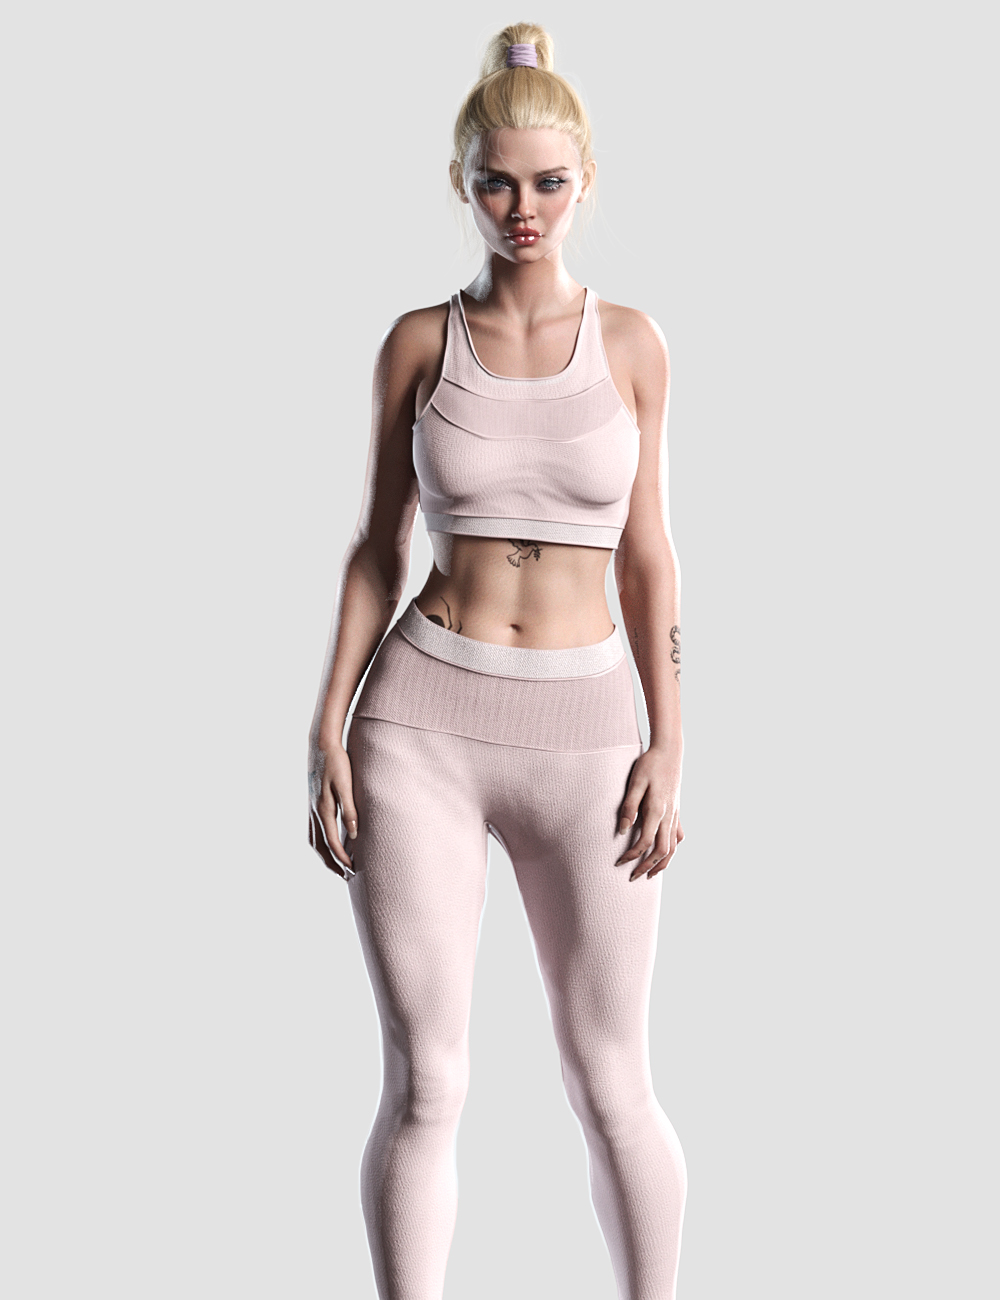 Knit Sports Outfit for Genesis 8 Females by: Romeo, 3D Models by Daz 3D